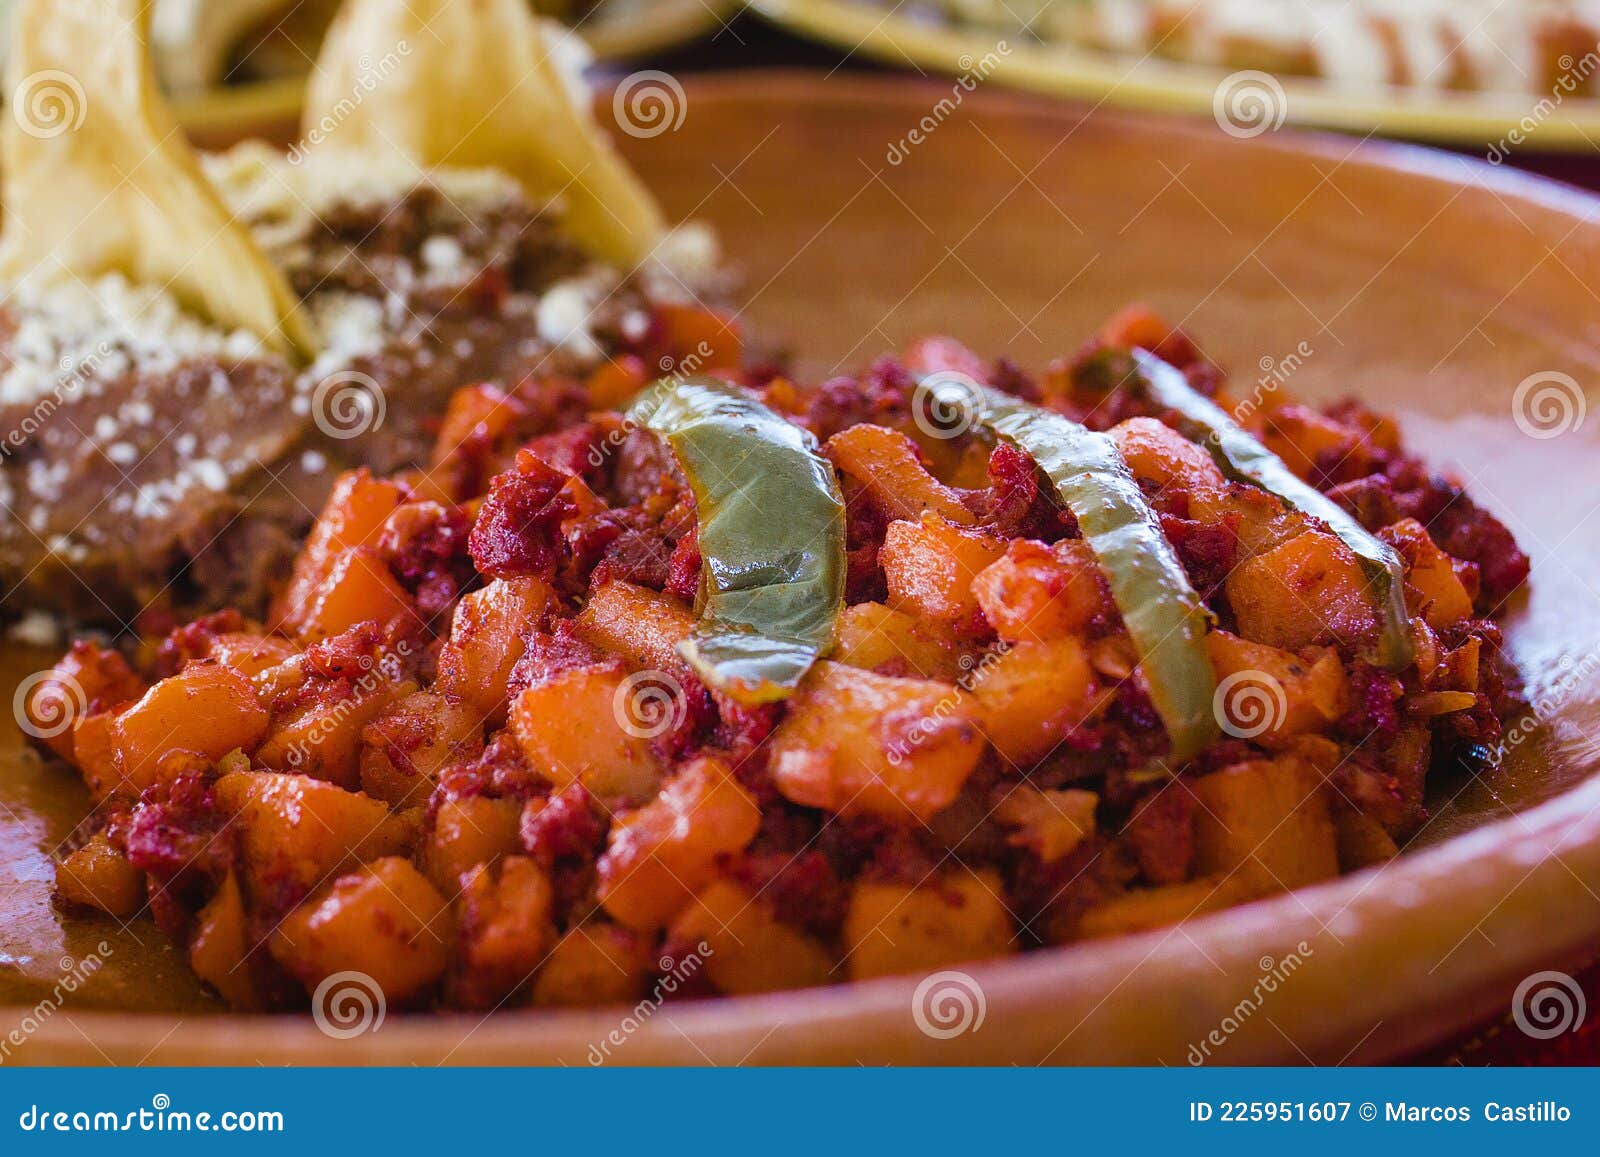 papas with chorizo or potatoes with chorizo and refried beans, mexican food in mexico city